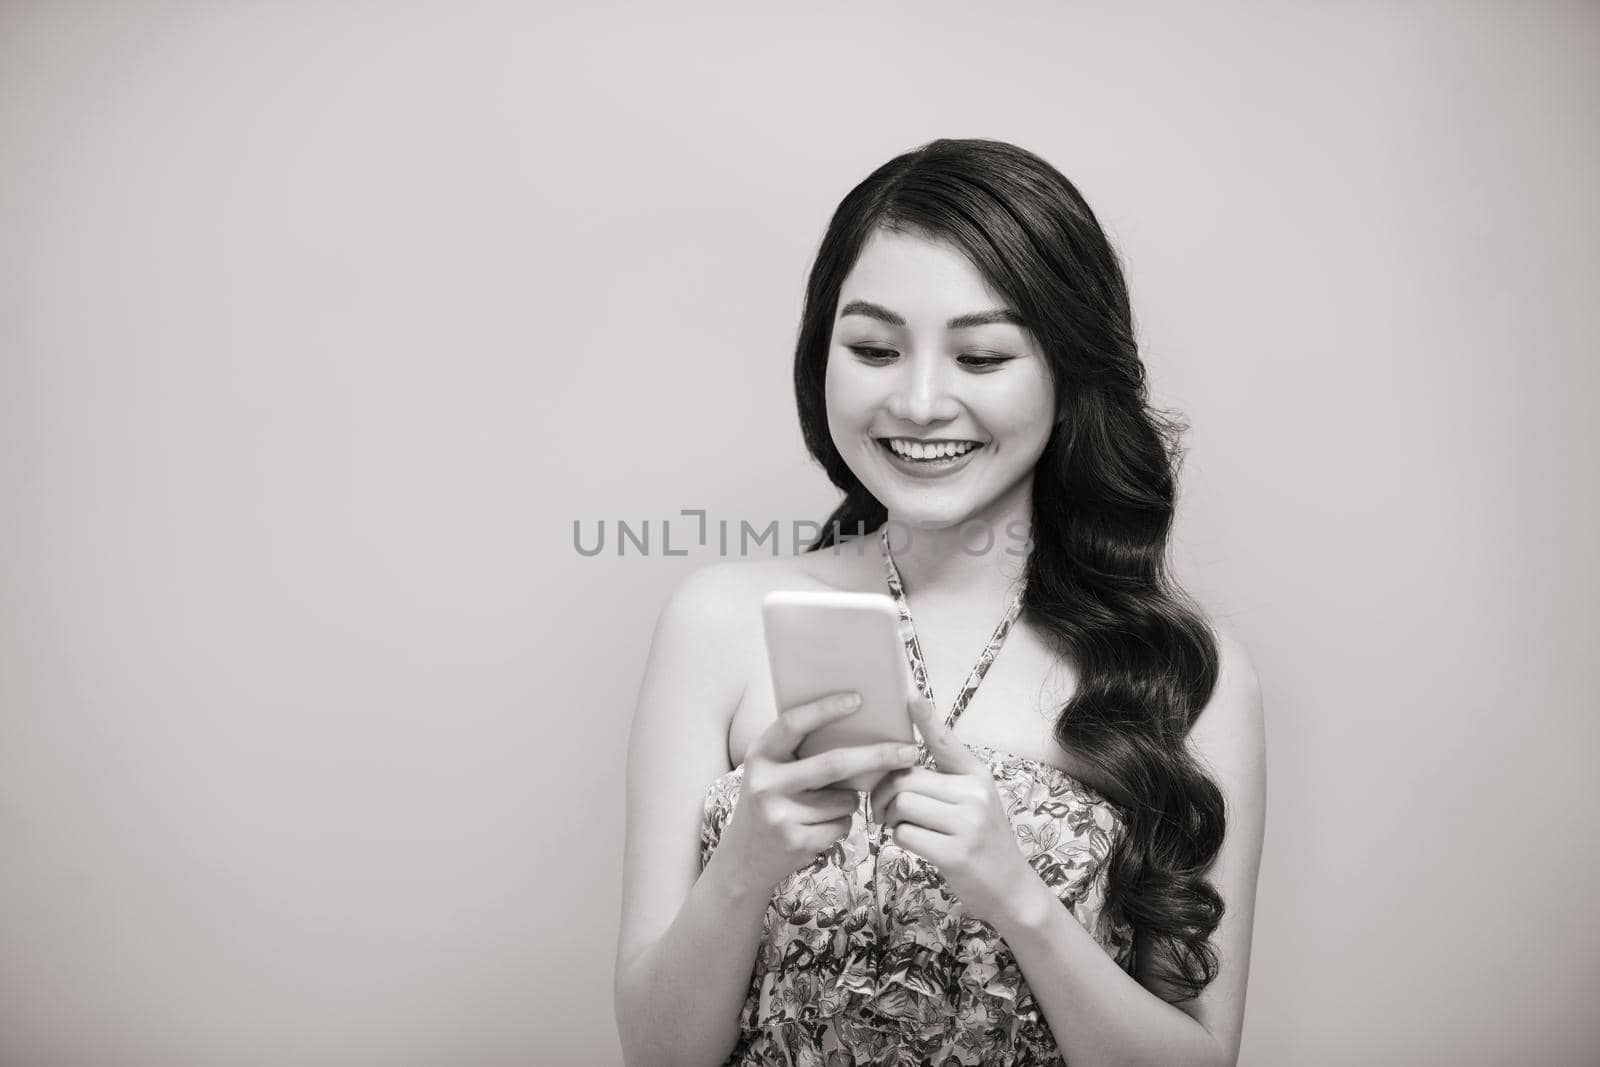 Portrait of a smiling casual woman holding smartphone over white background. Black-white photo.